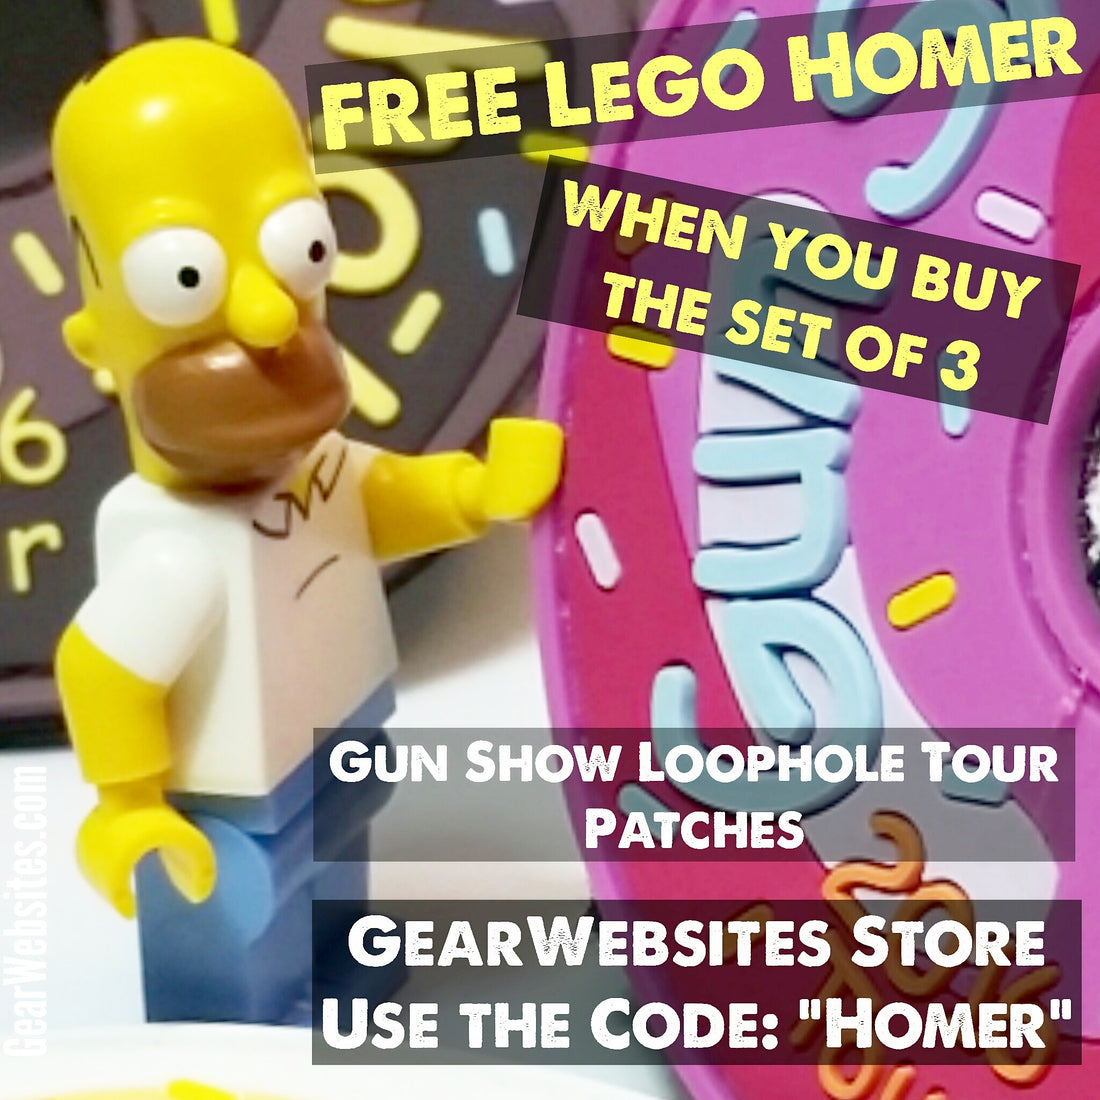 Use Coupon Code "Homer" for a FREE 'Lego' Homer when you buy 3 Gun Show Loophole Donut Patches